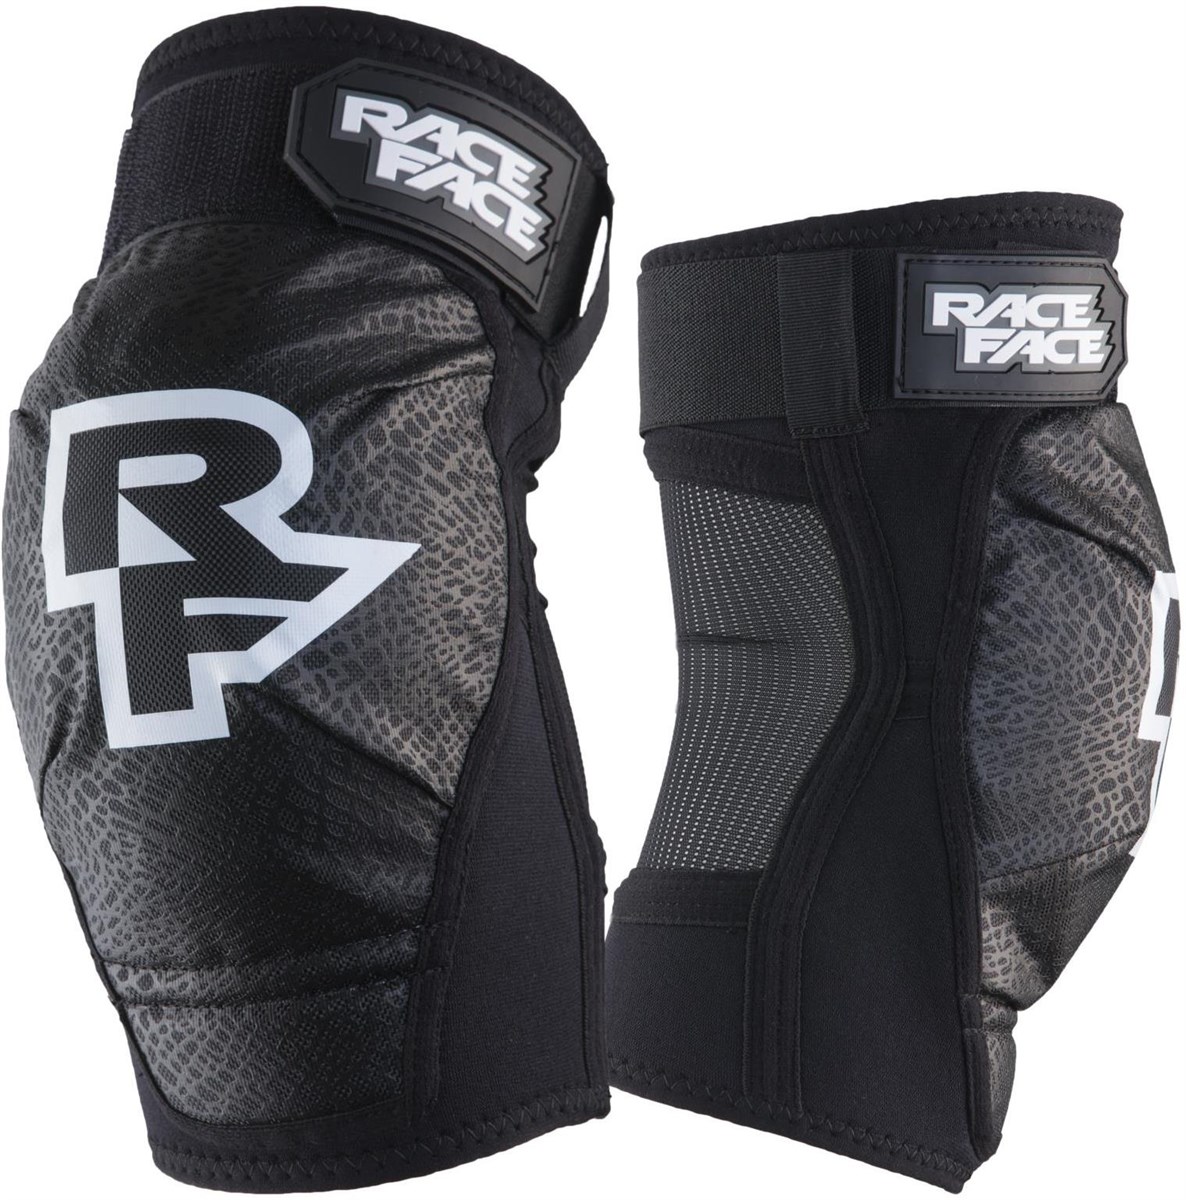 Race Face Dig Elbow Guard product image